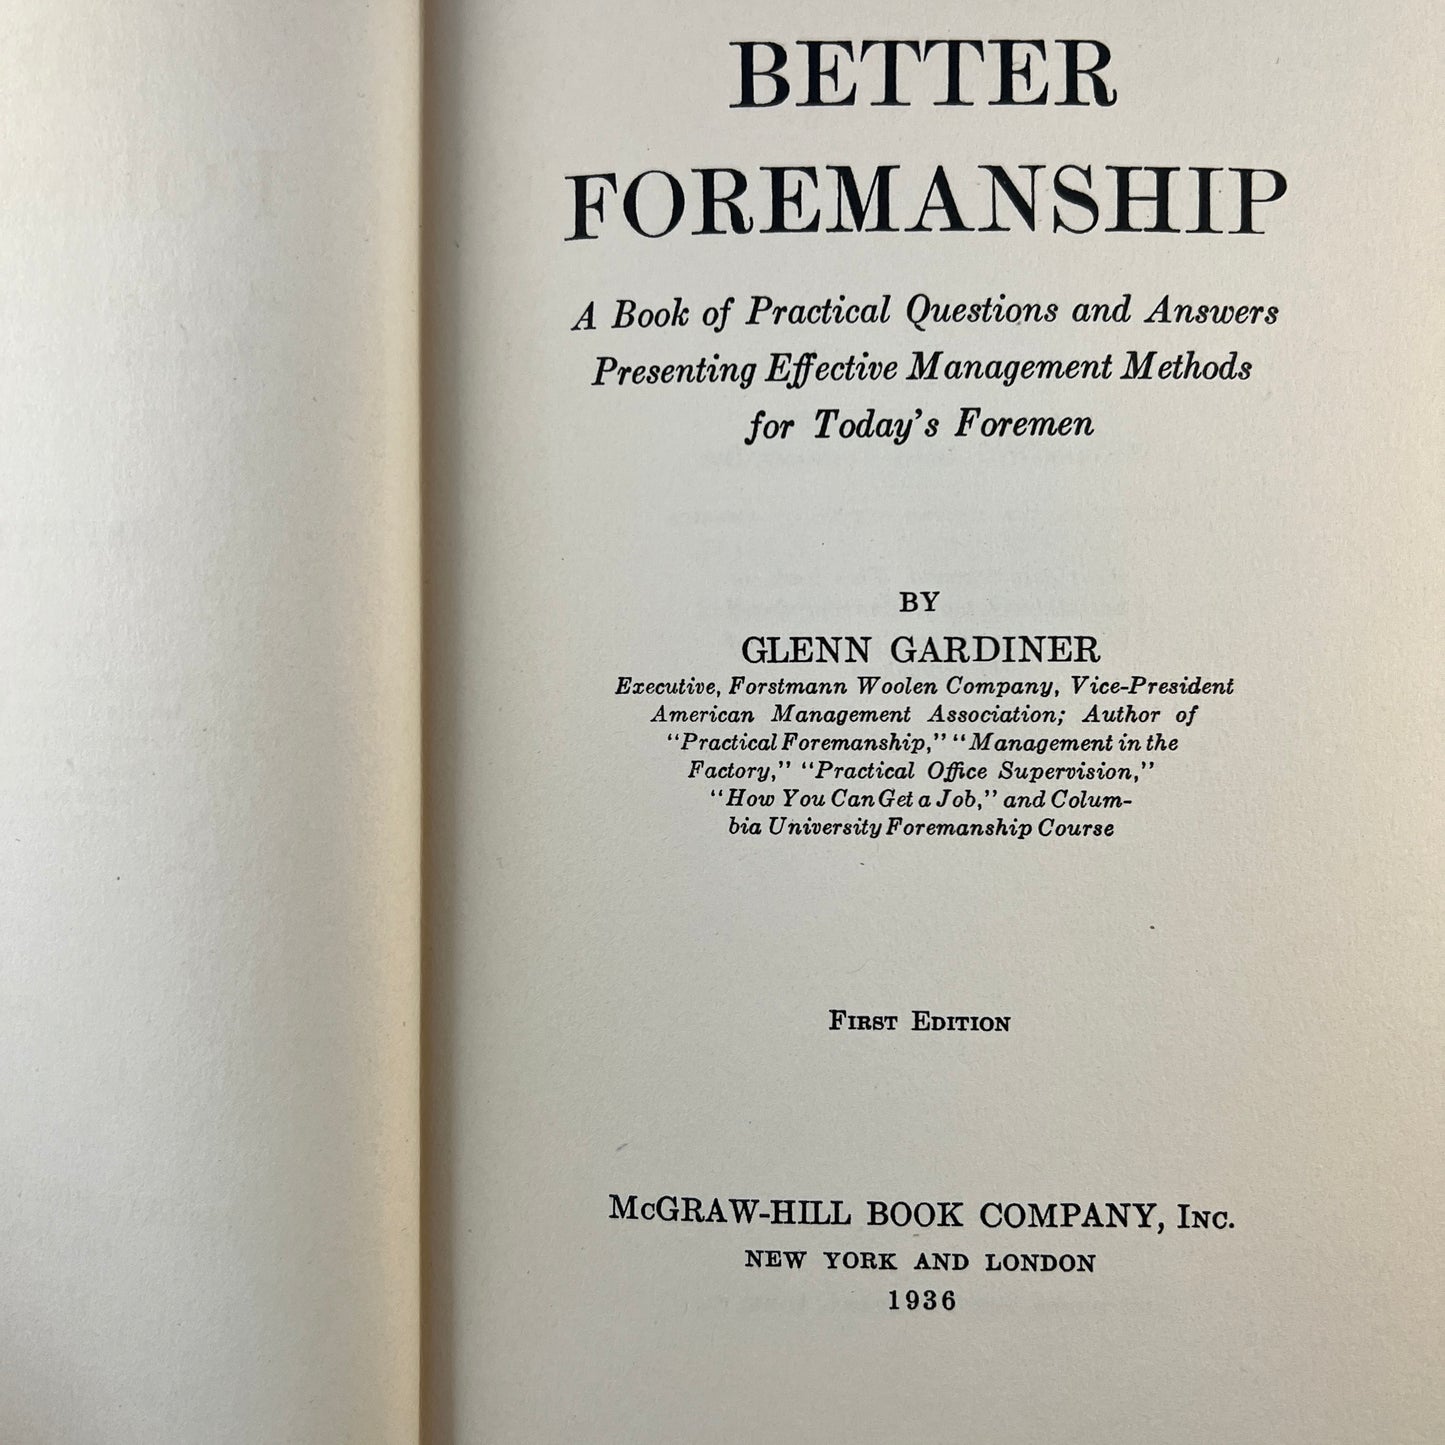 Better Foremanship: A Book of Practical Questions and Answers Presenting Effective Management Methods for Today's Foreman